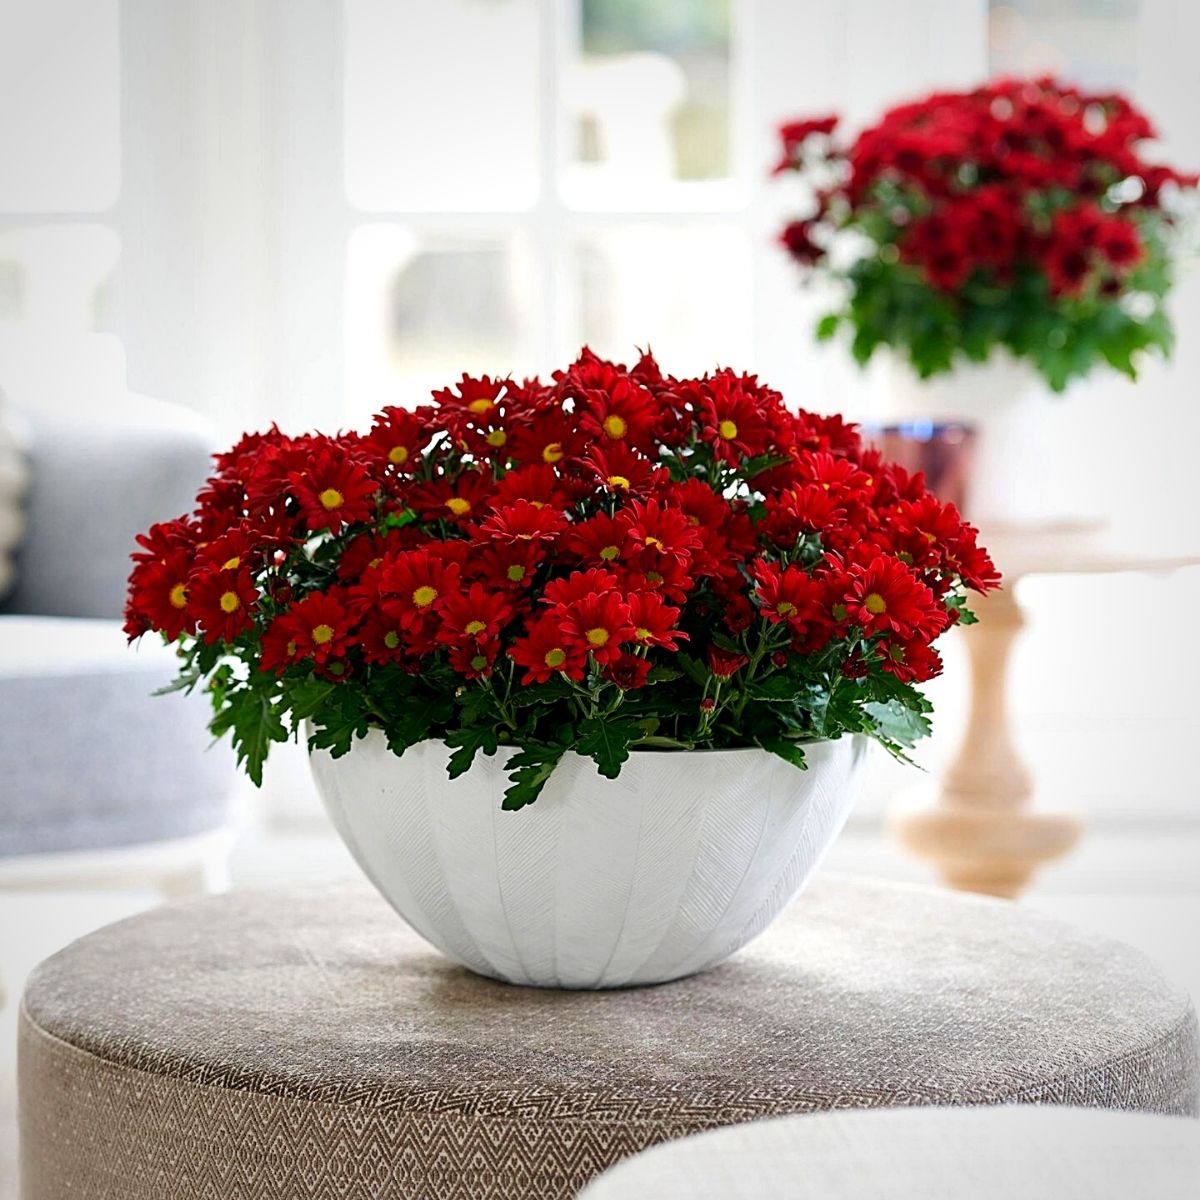 ​Red Chrysanthemums for Valentine’s Day